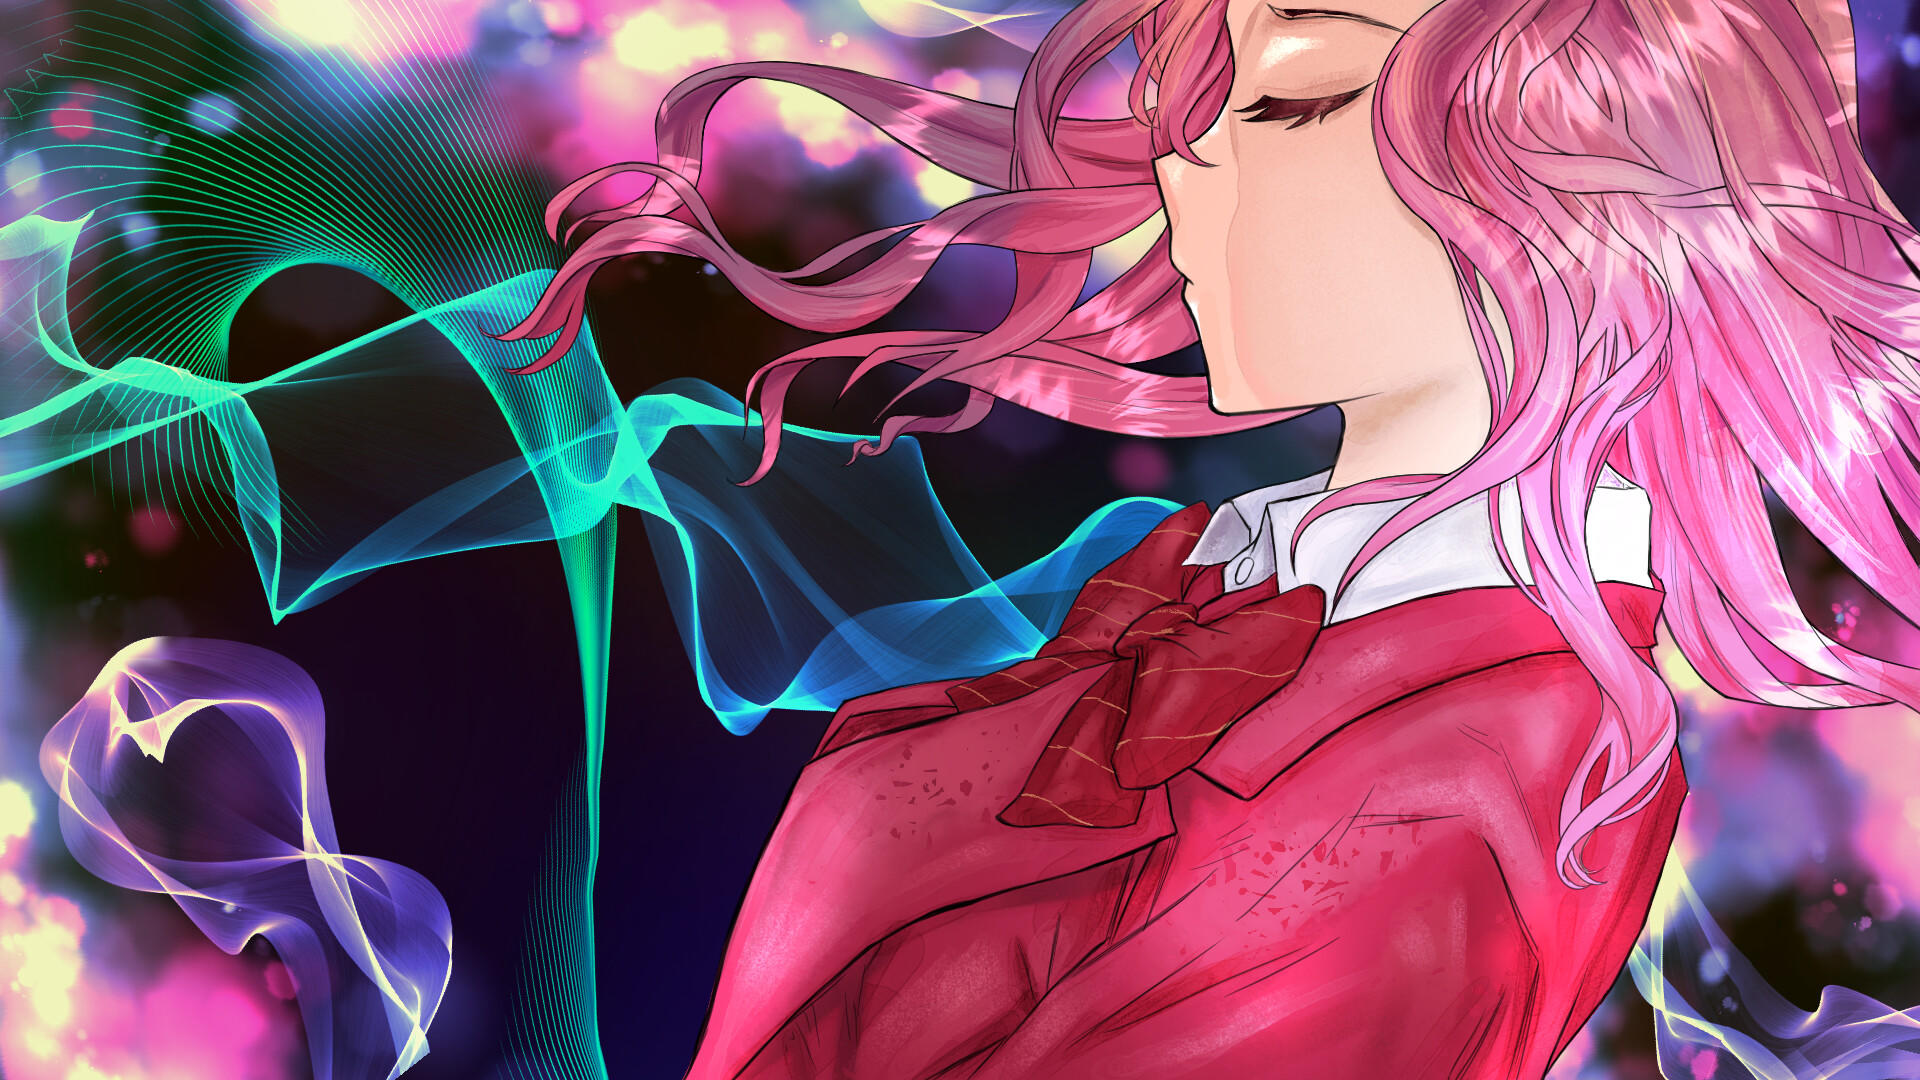 Tale of REN ~ [Searching for HEART droplets] ~ ภาพหน้าจอเกม